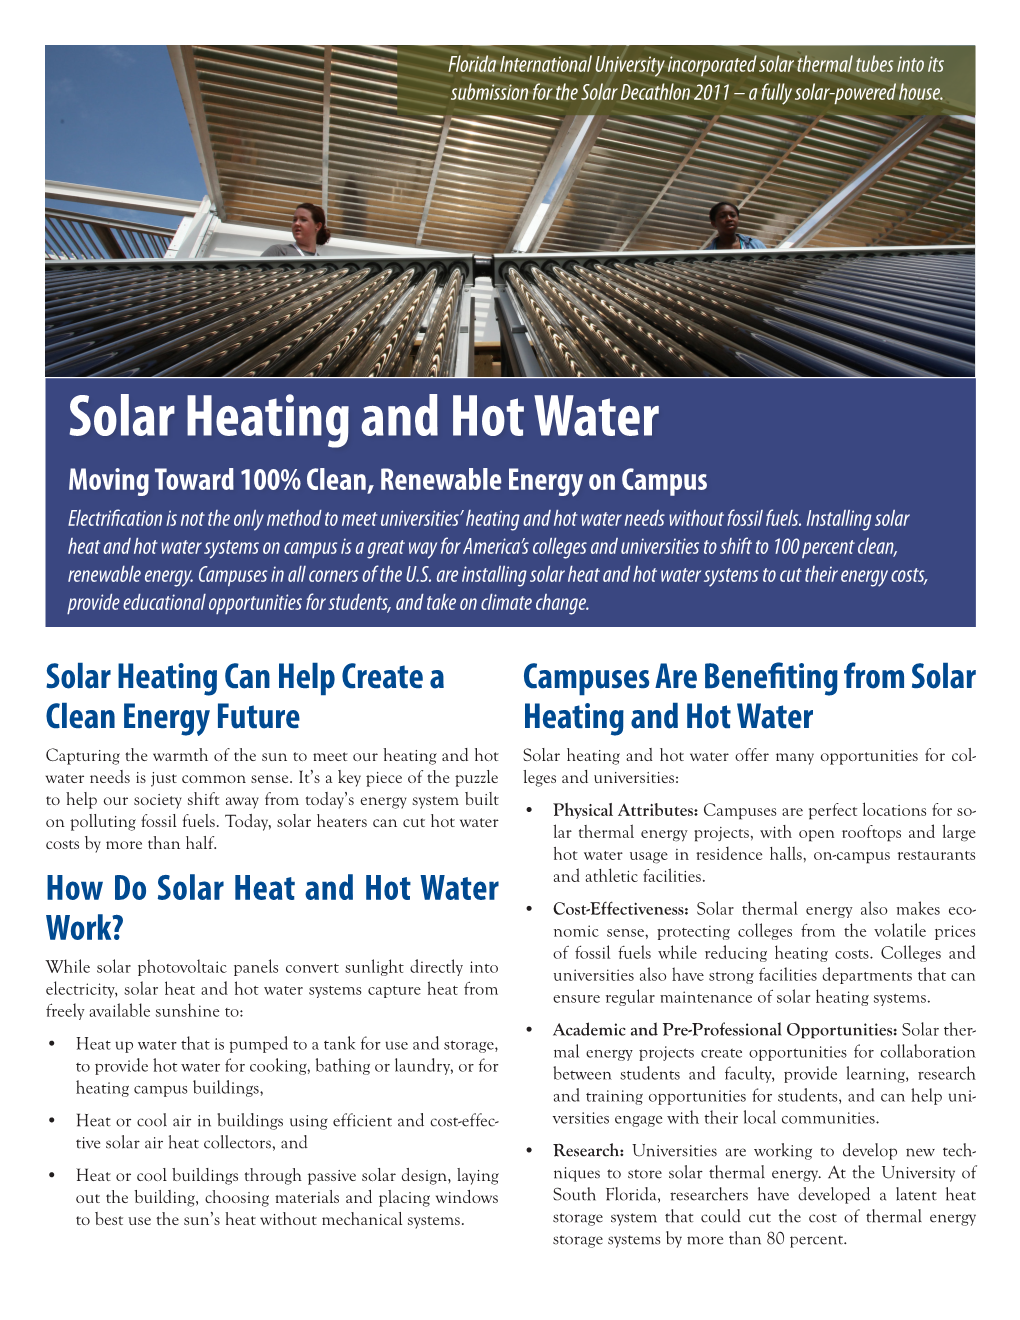 Solar Heating and Hot Water